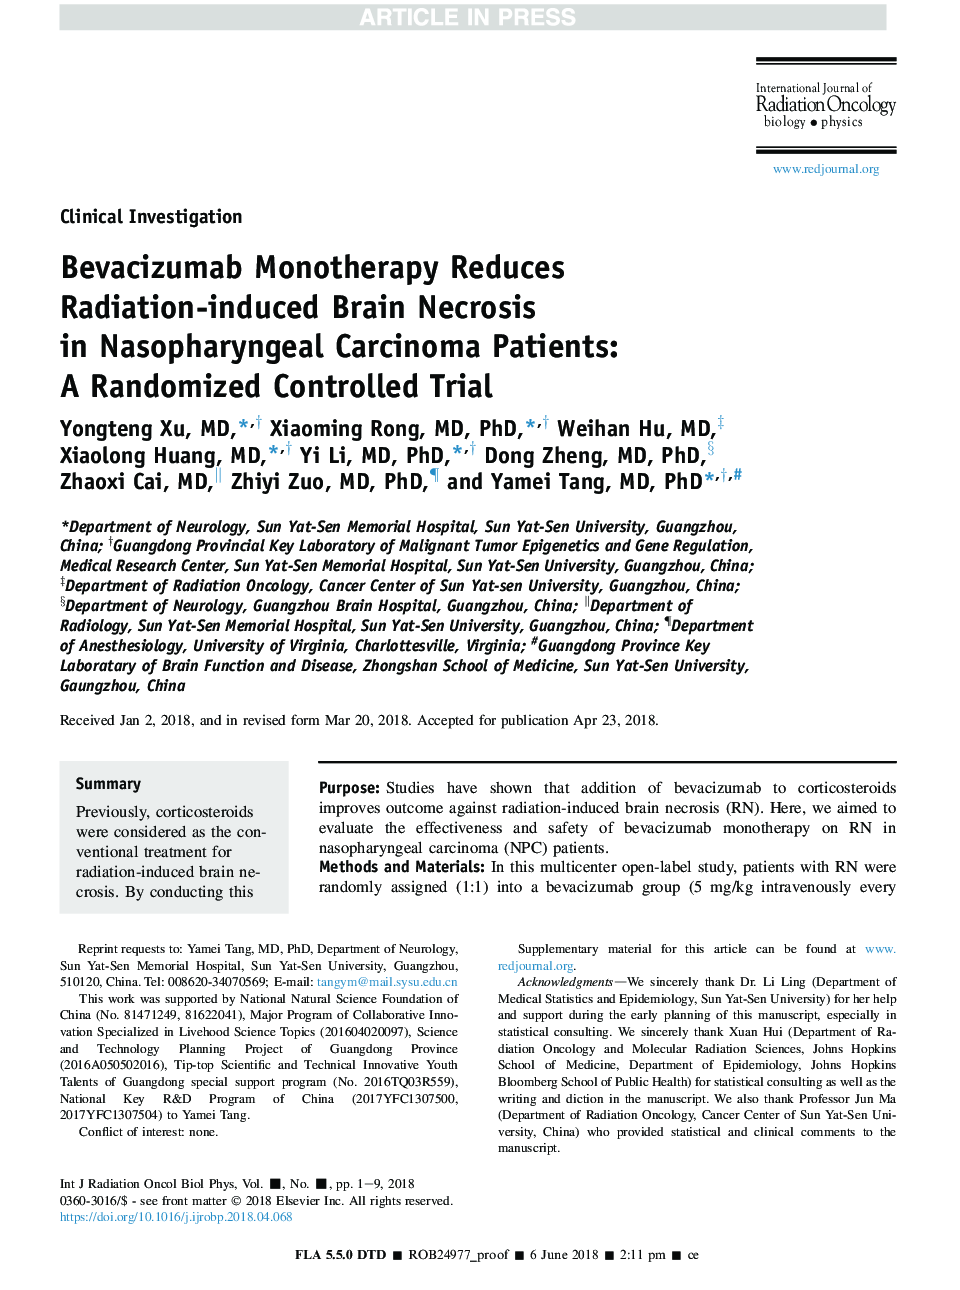 Bevacizumab Monotherapy Reduces Radiation-induced Brain Necrosis in Nasopharyngeal Carcinoma Patients: A Randomized Controlled Trial